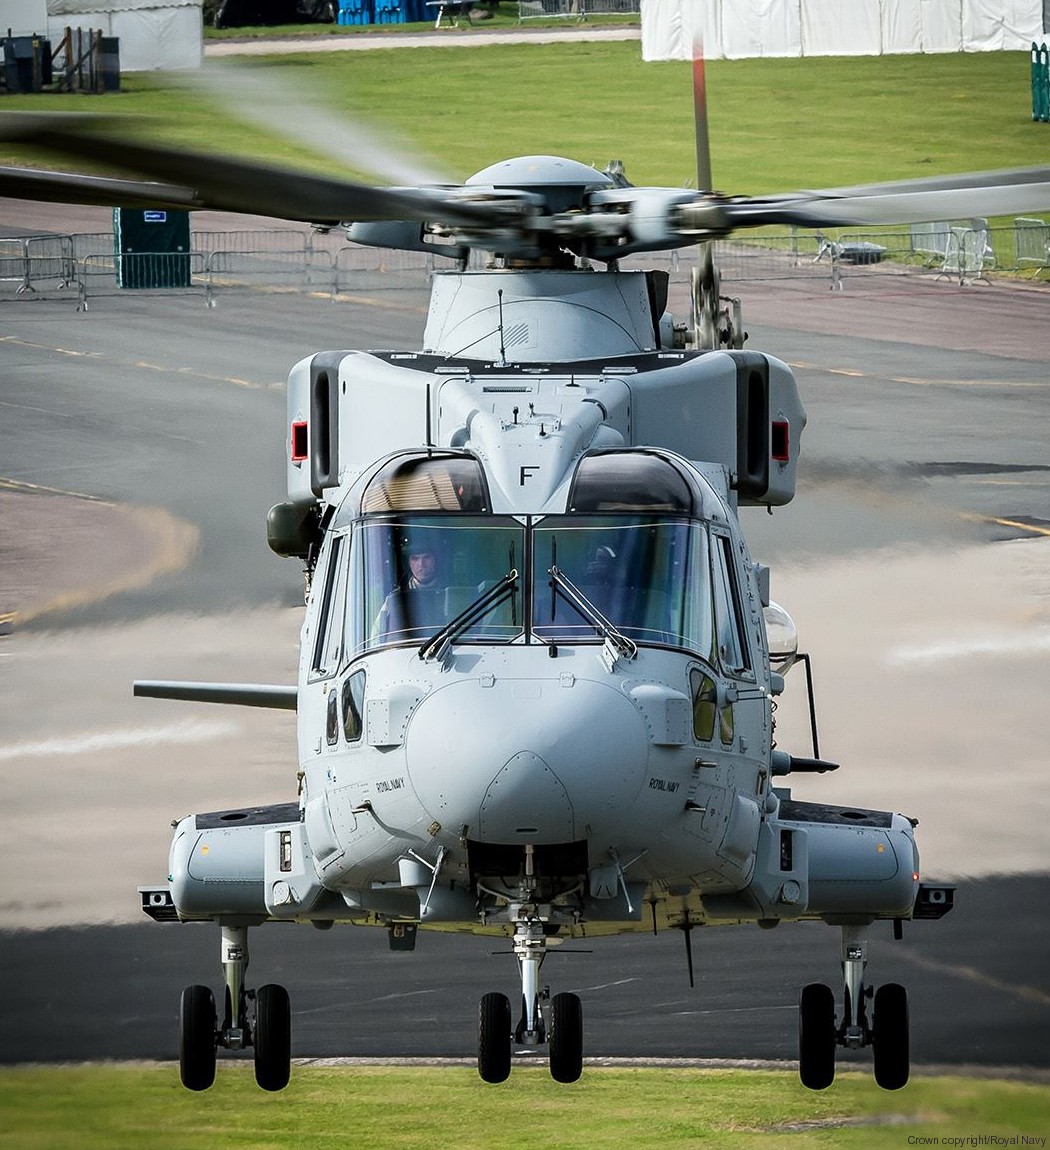 merlin hc4 mk.4 commando helicopter force chf royal navy 845 846 naval air squadron rnas yeovilton aw101 26